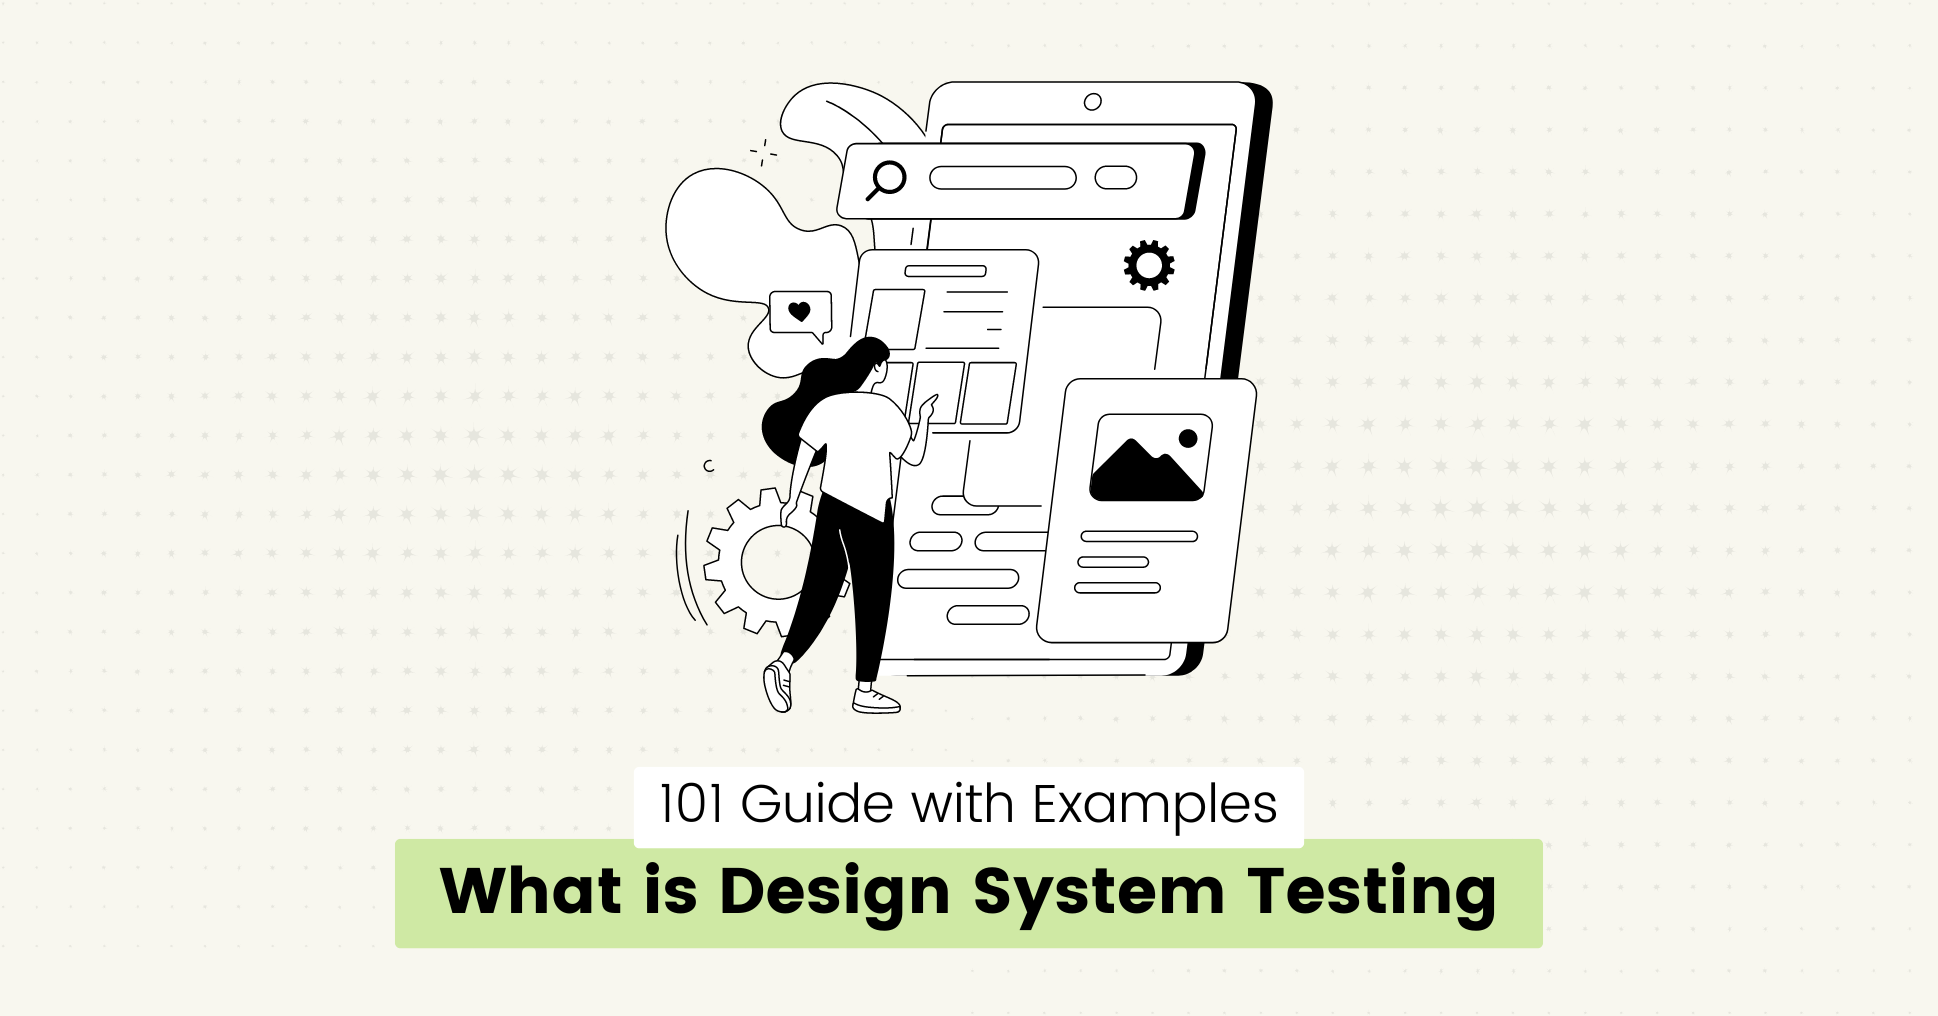 What is Design System Testing